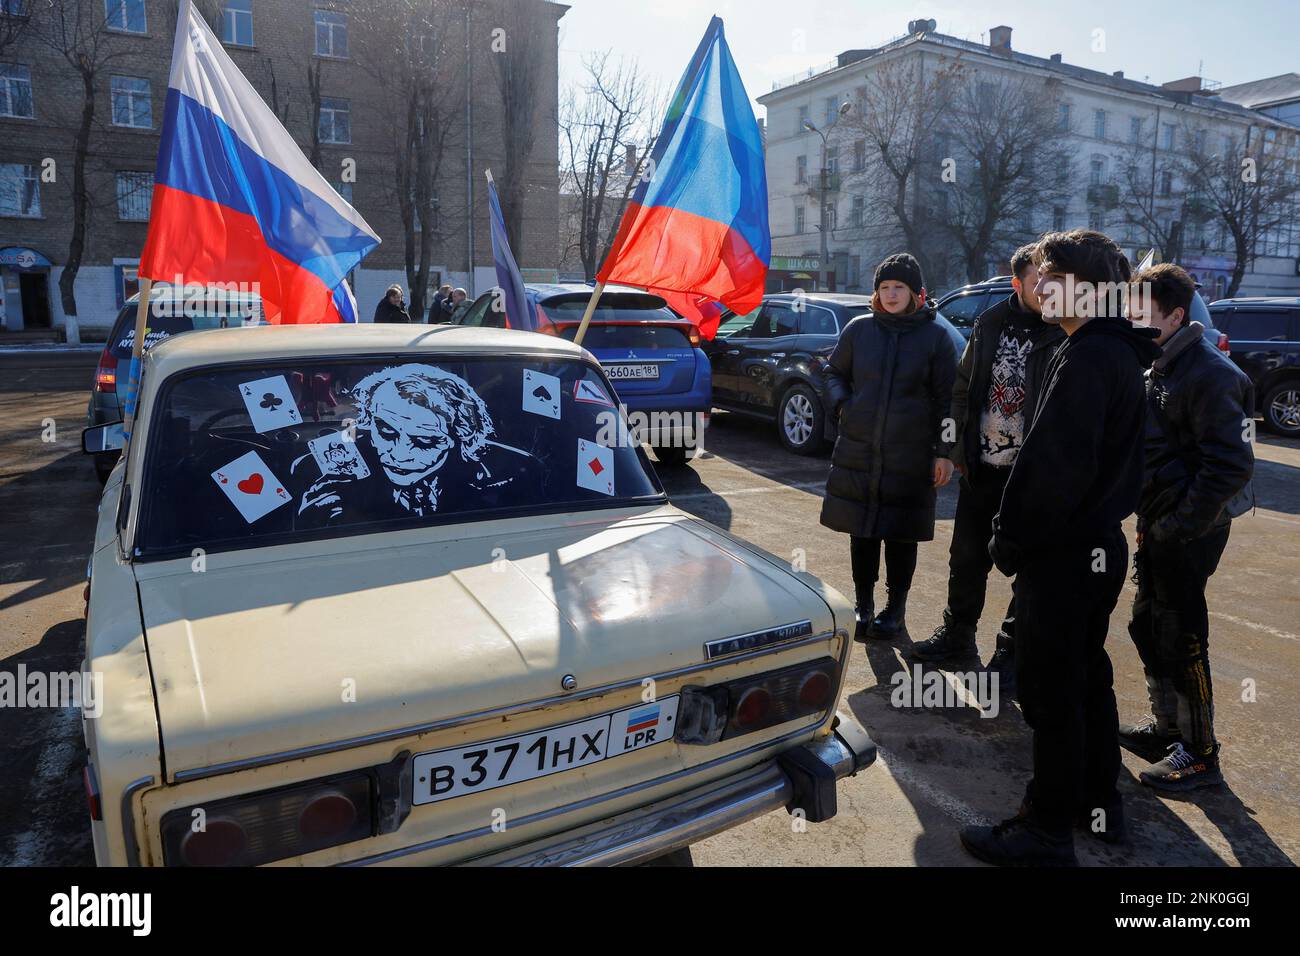 Participants gather near cars before the start of an automobile rally marking Russia's Defender of the Fatherland Day in the course of Russia-Ukraine conflict in Luhansk, Russian-controlled Ukraine, February 23, 2023. REUTERS/Alexander Ermochenko Stock Photo